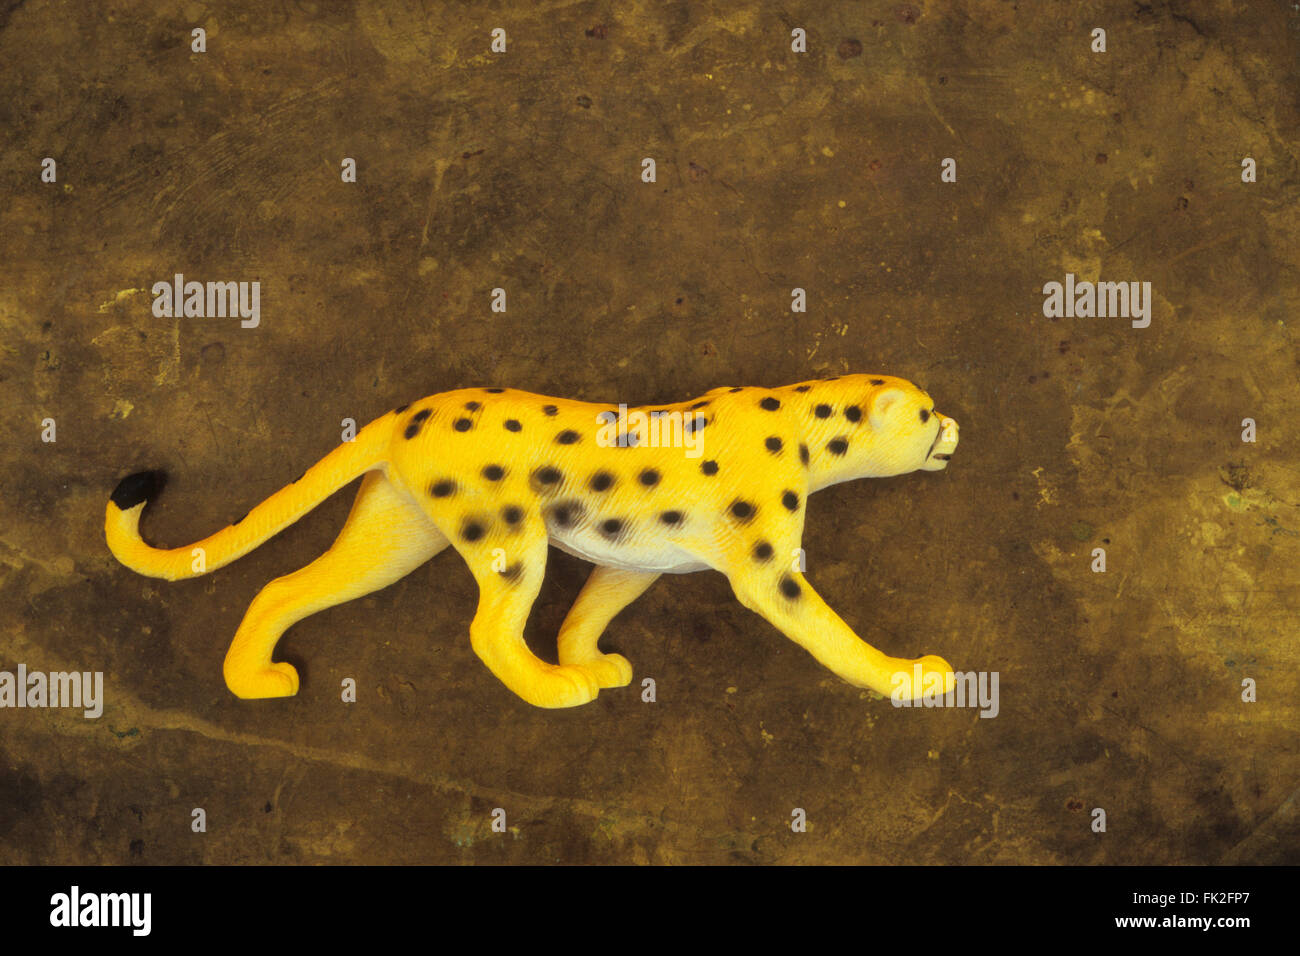 Plastic model of yellow cheetah with black spots in stalking position and lying on tarnished brass Stock Photo